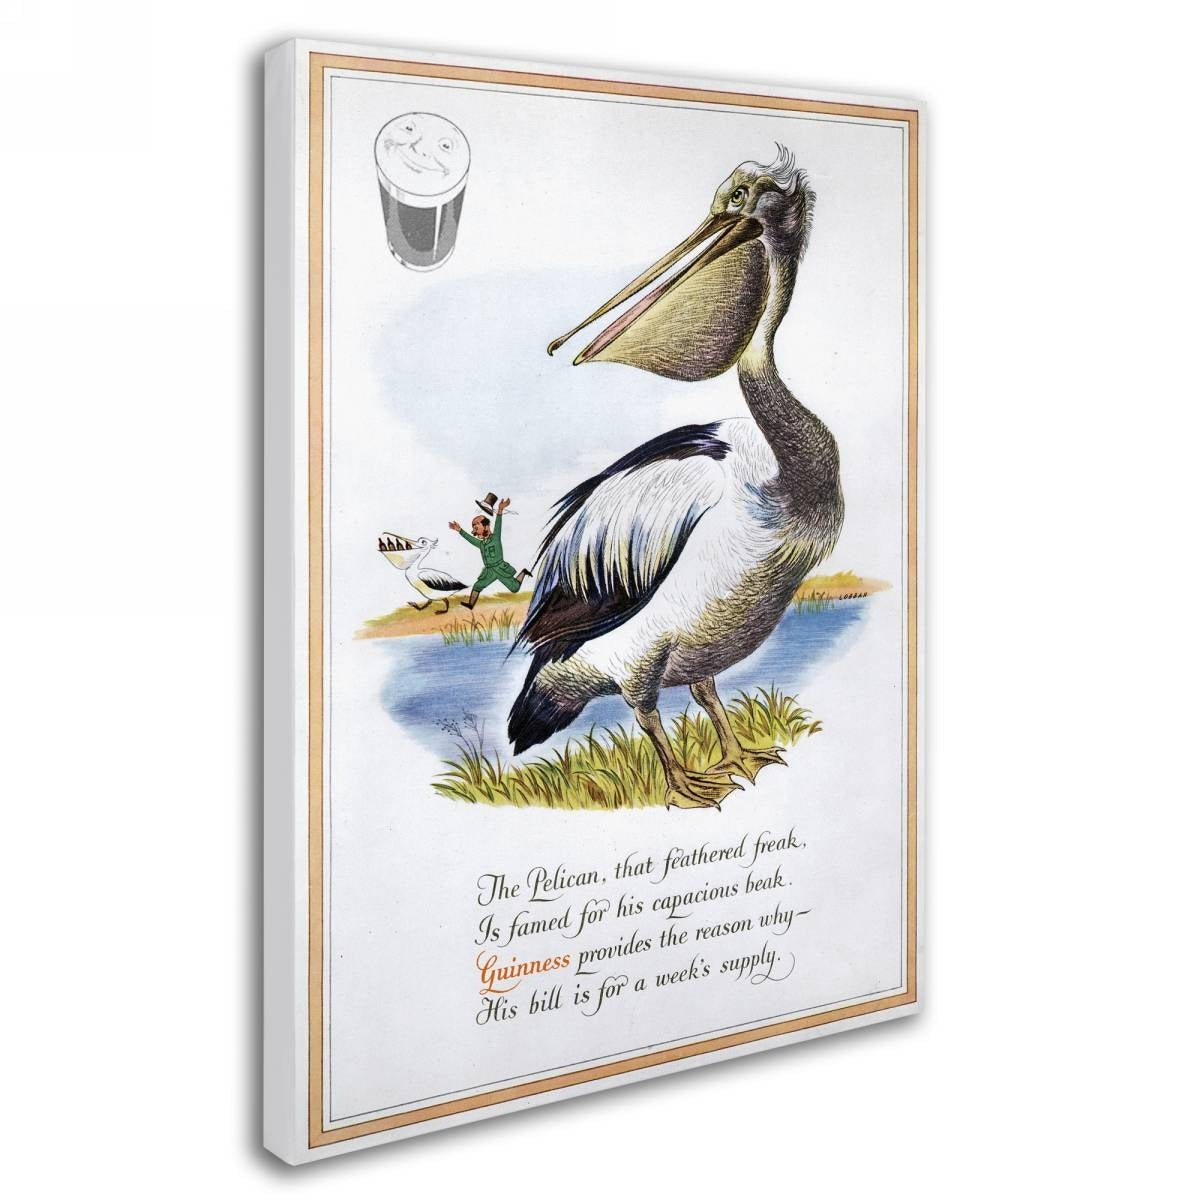 A Guinness pelican on a wall canvas.